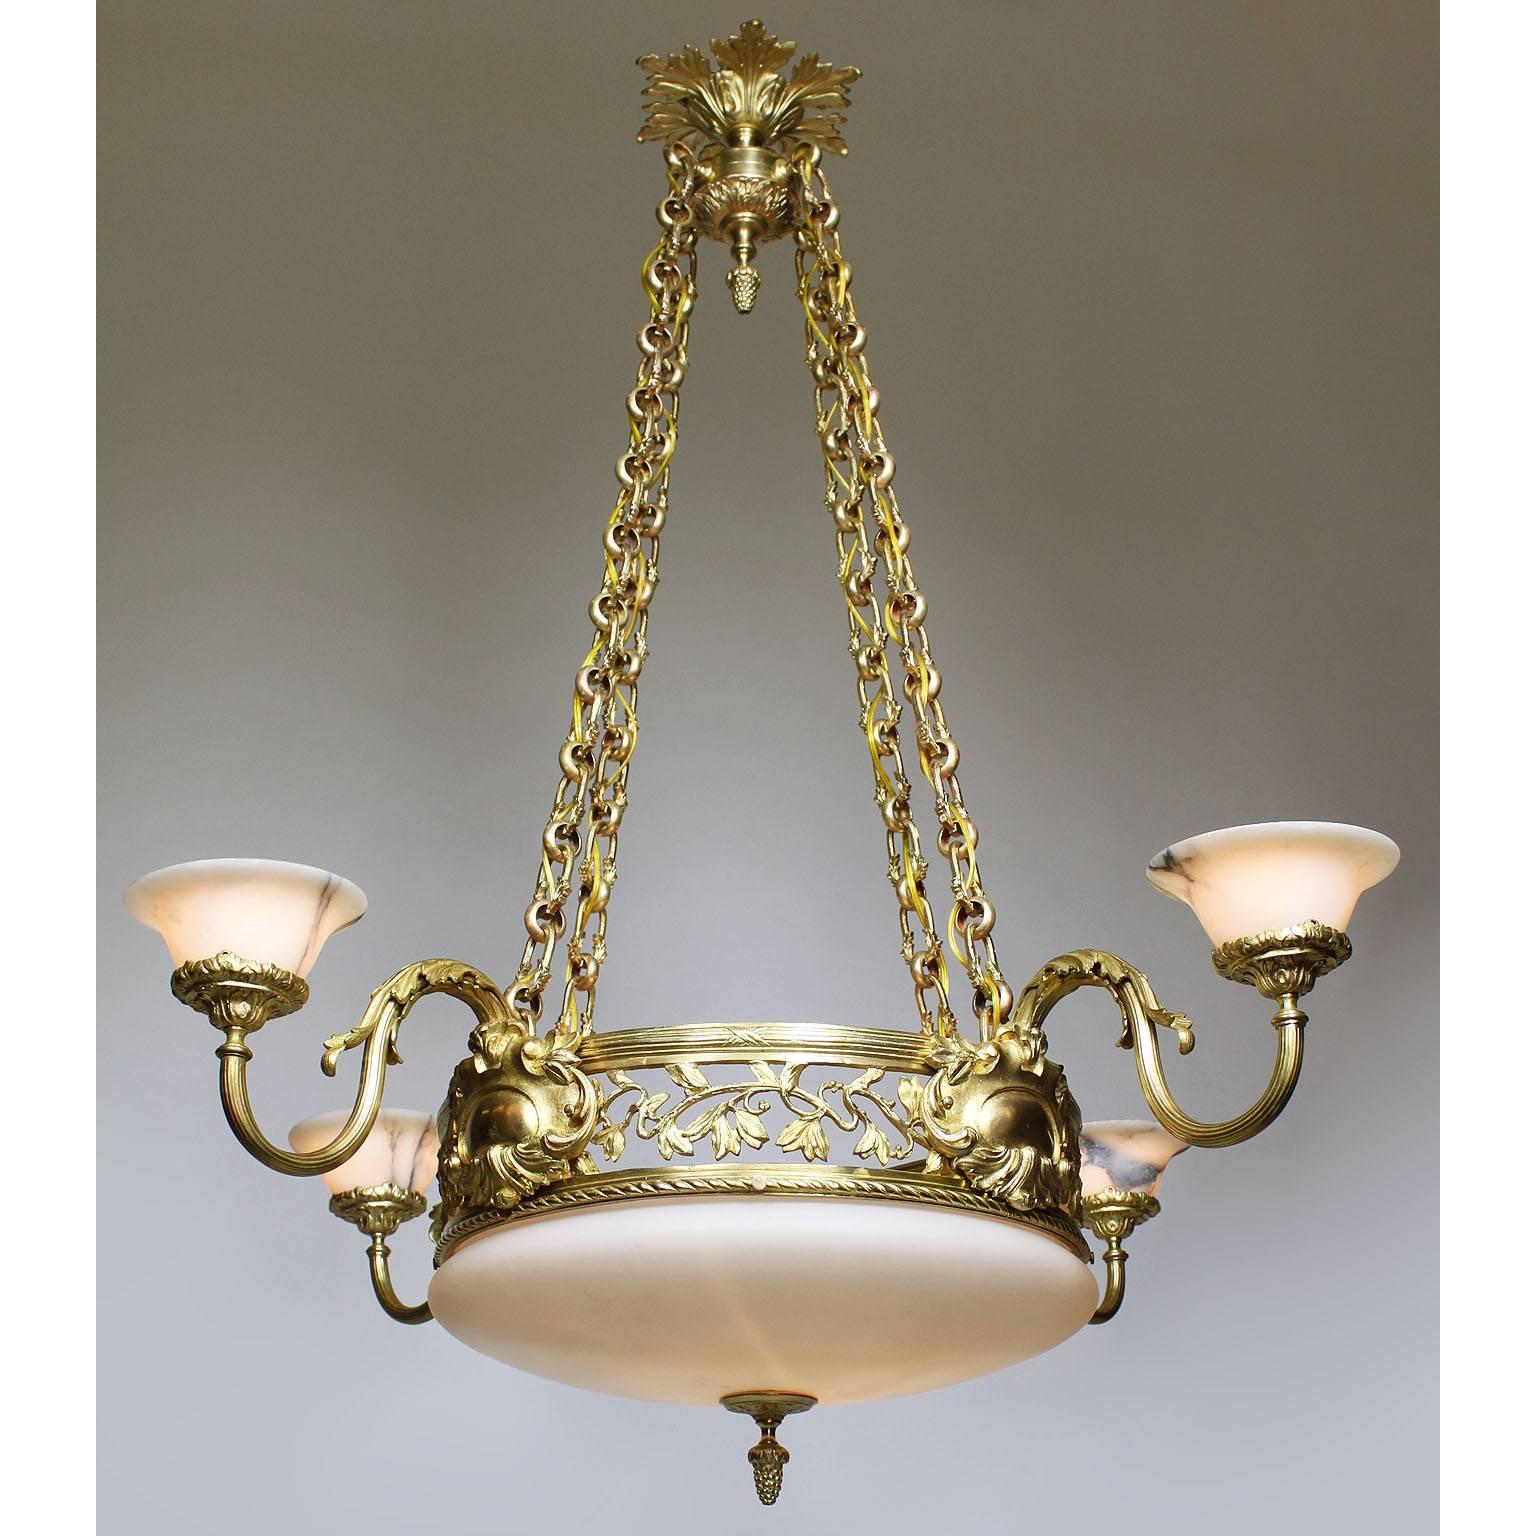 A fine French early 20th century neoclassical Revival style gilt-bronze, alabaster and opaline glass four-light chandelier. The intricate circular gilt-bronze frame suspended by four ornate gilt-bronze chain strands, the pierced apron decorated with